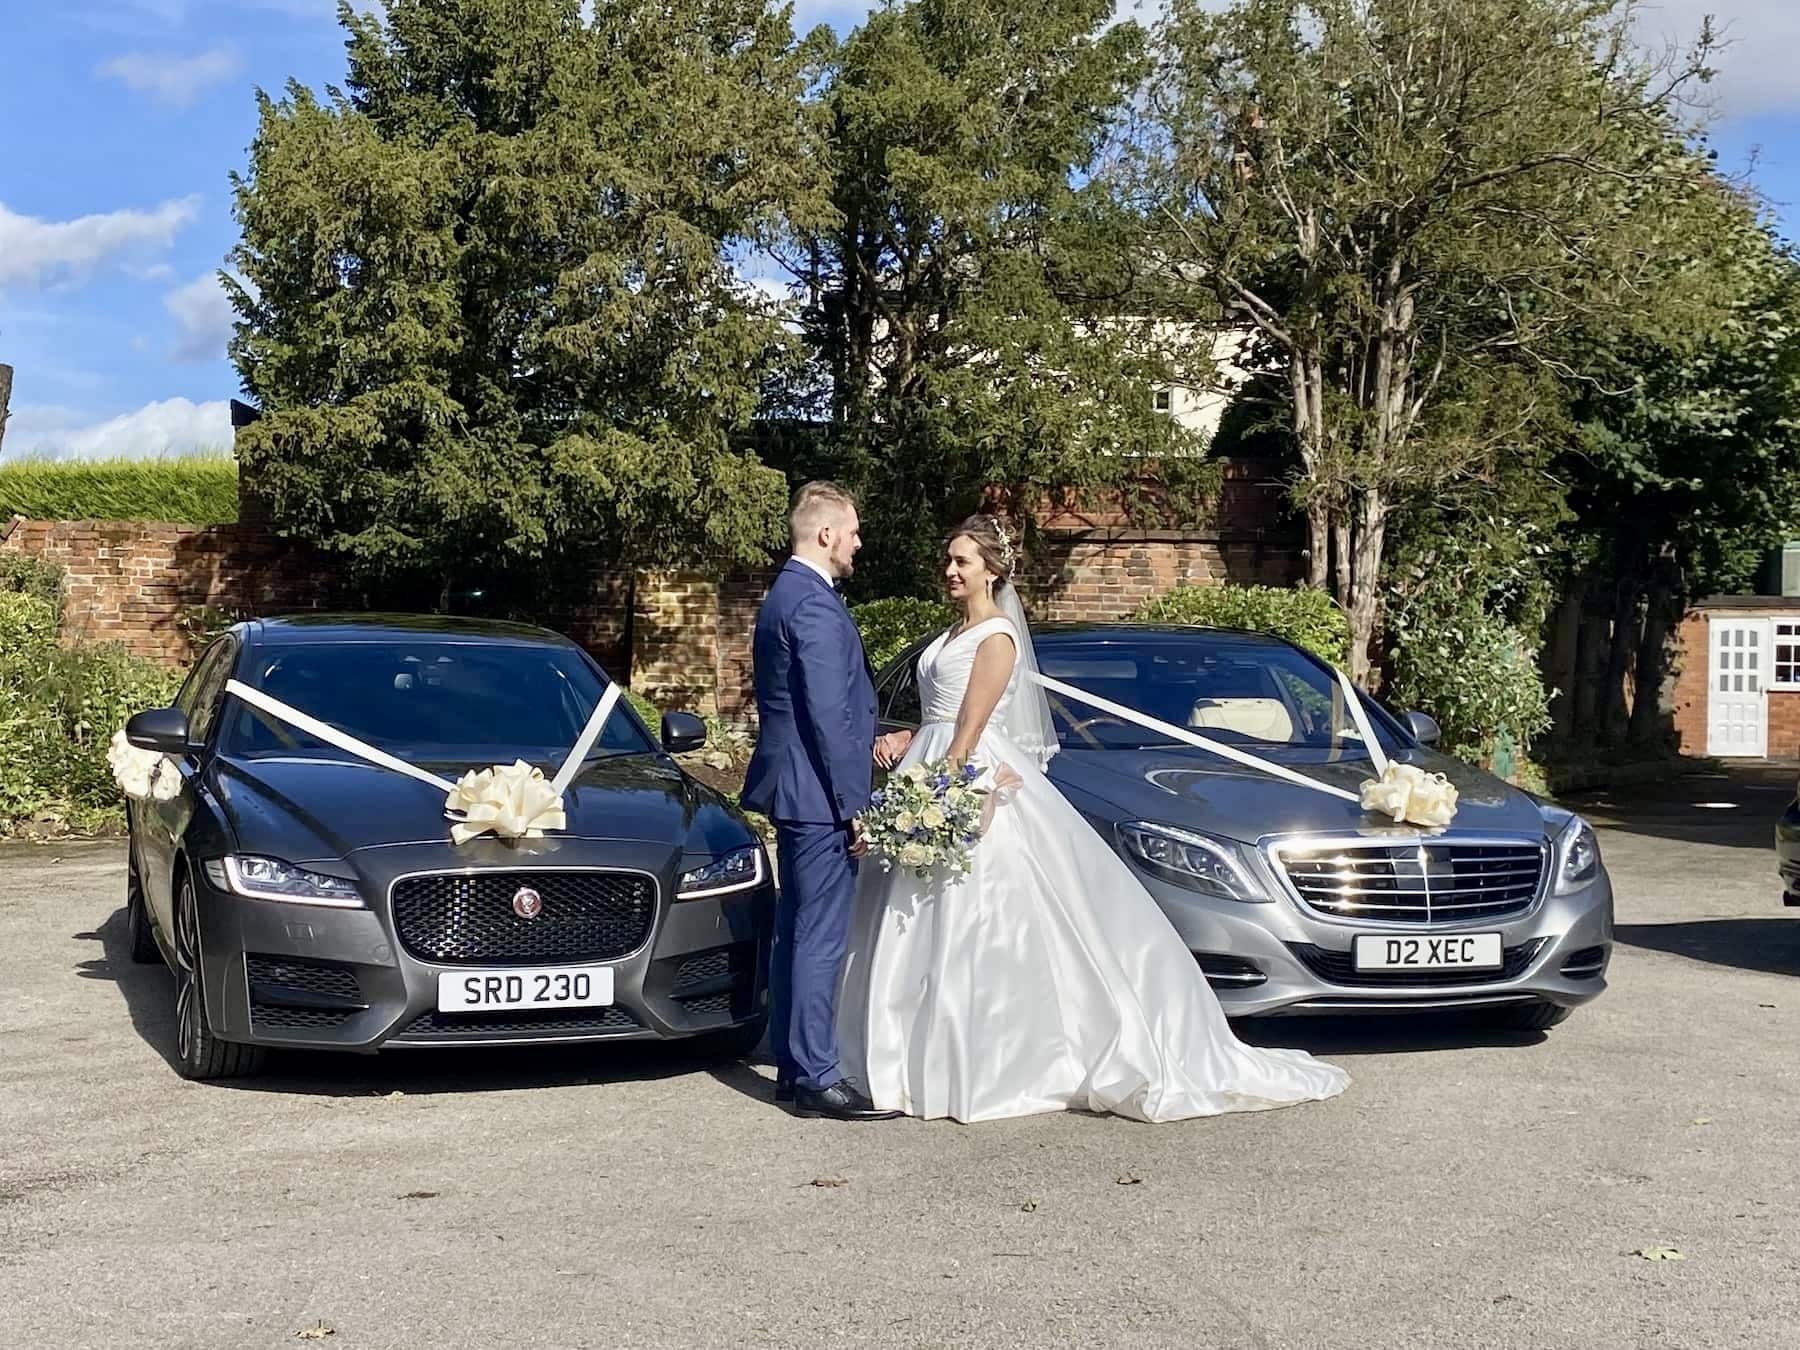 The Jaguar and Mercedes Wedding Cars on a recent Wedding Car hire in Derby